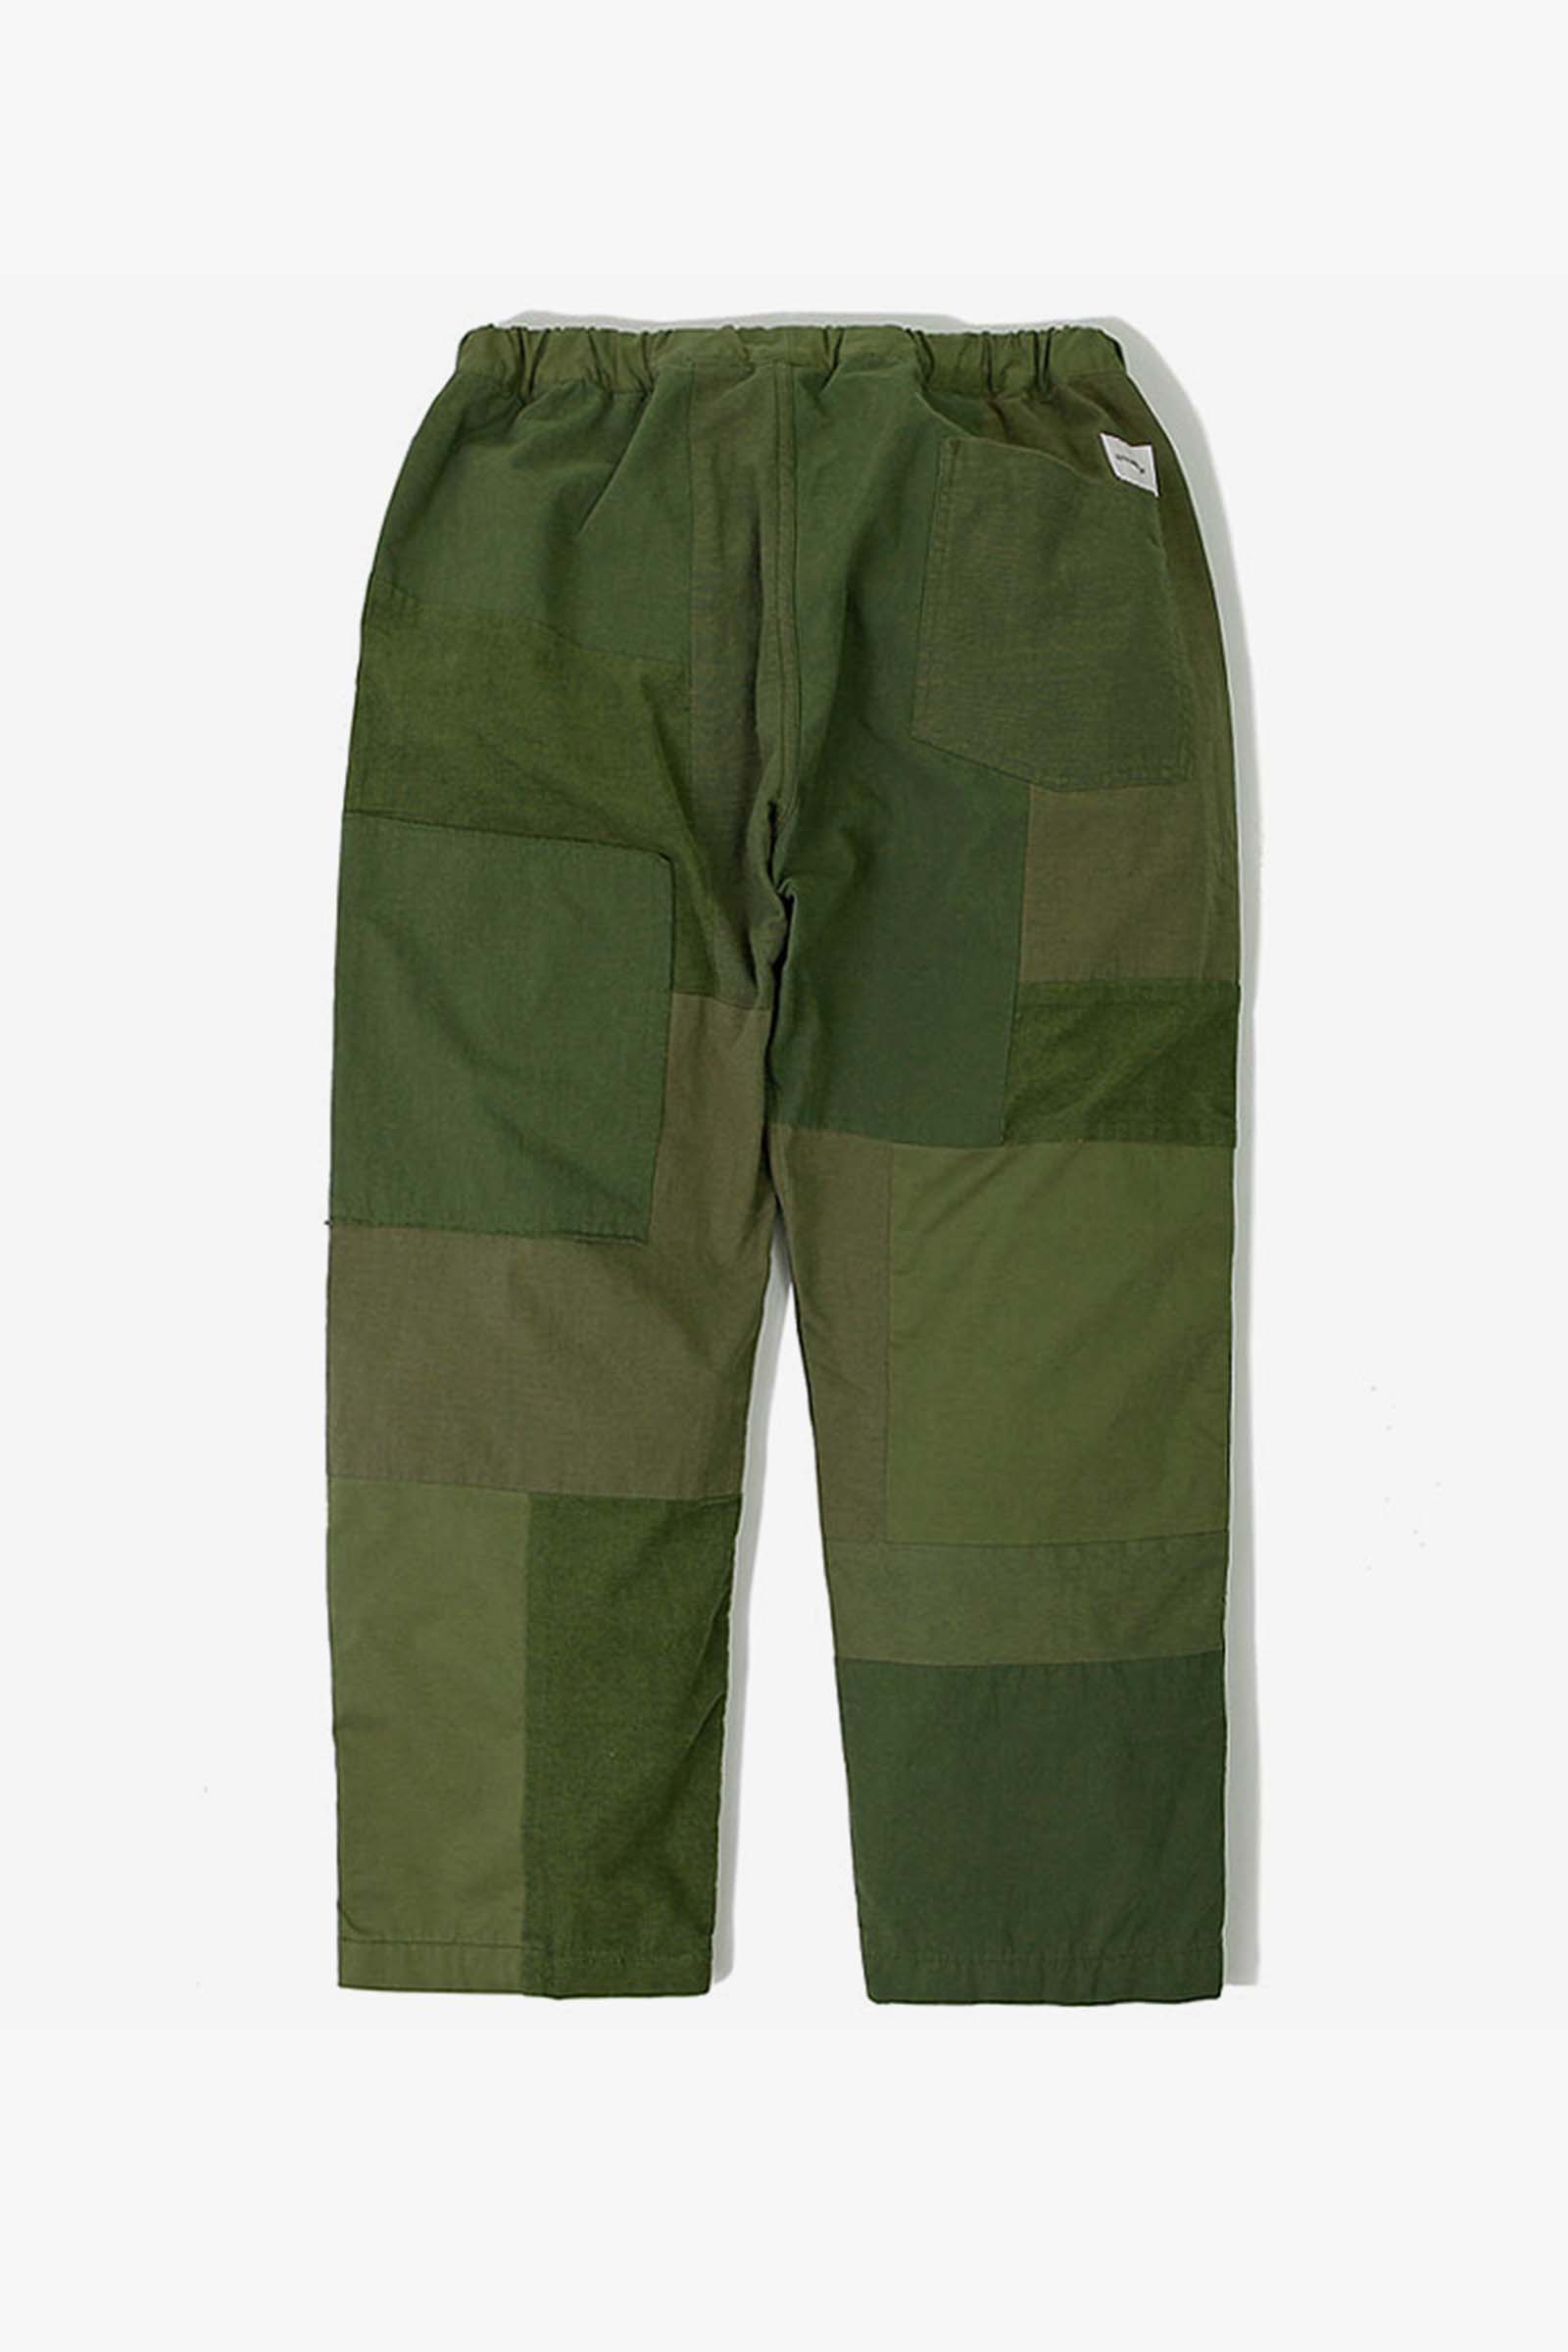 Outstanding & Co. - Remake Pants - Olive